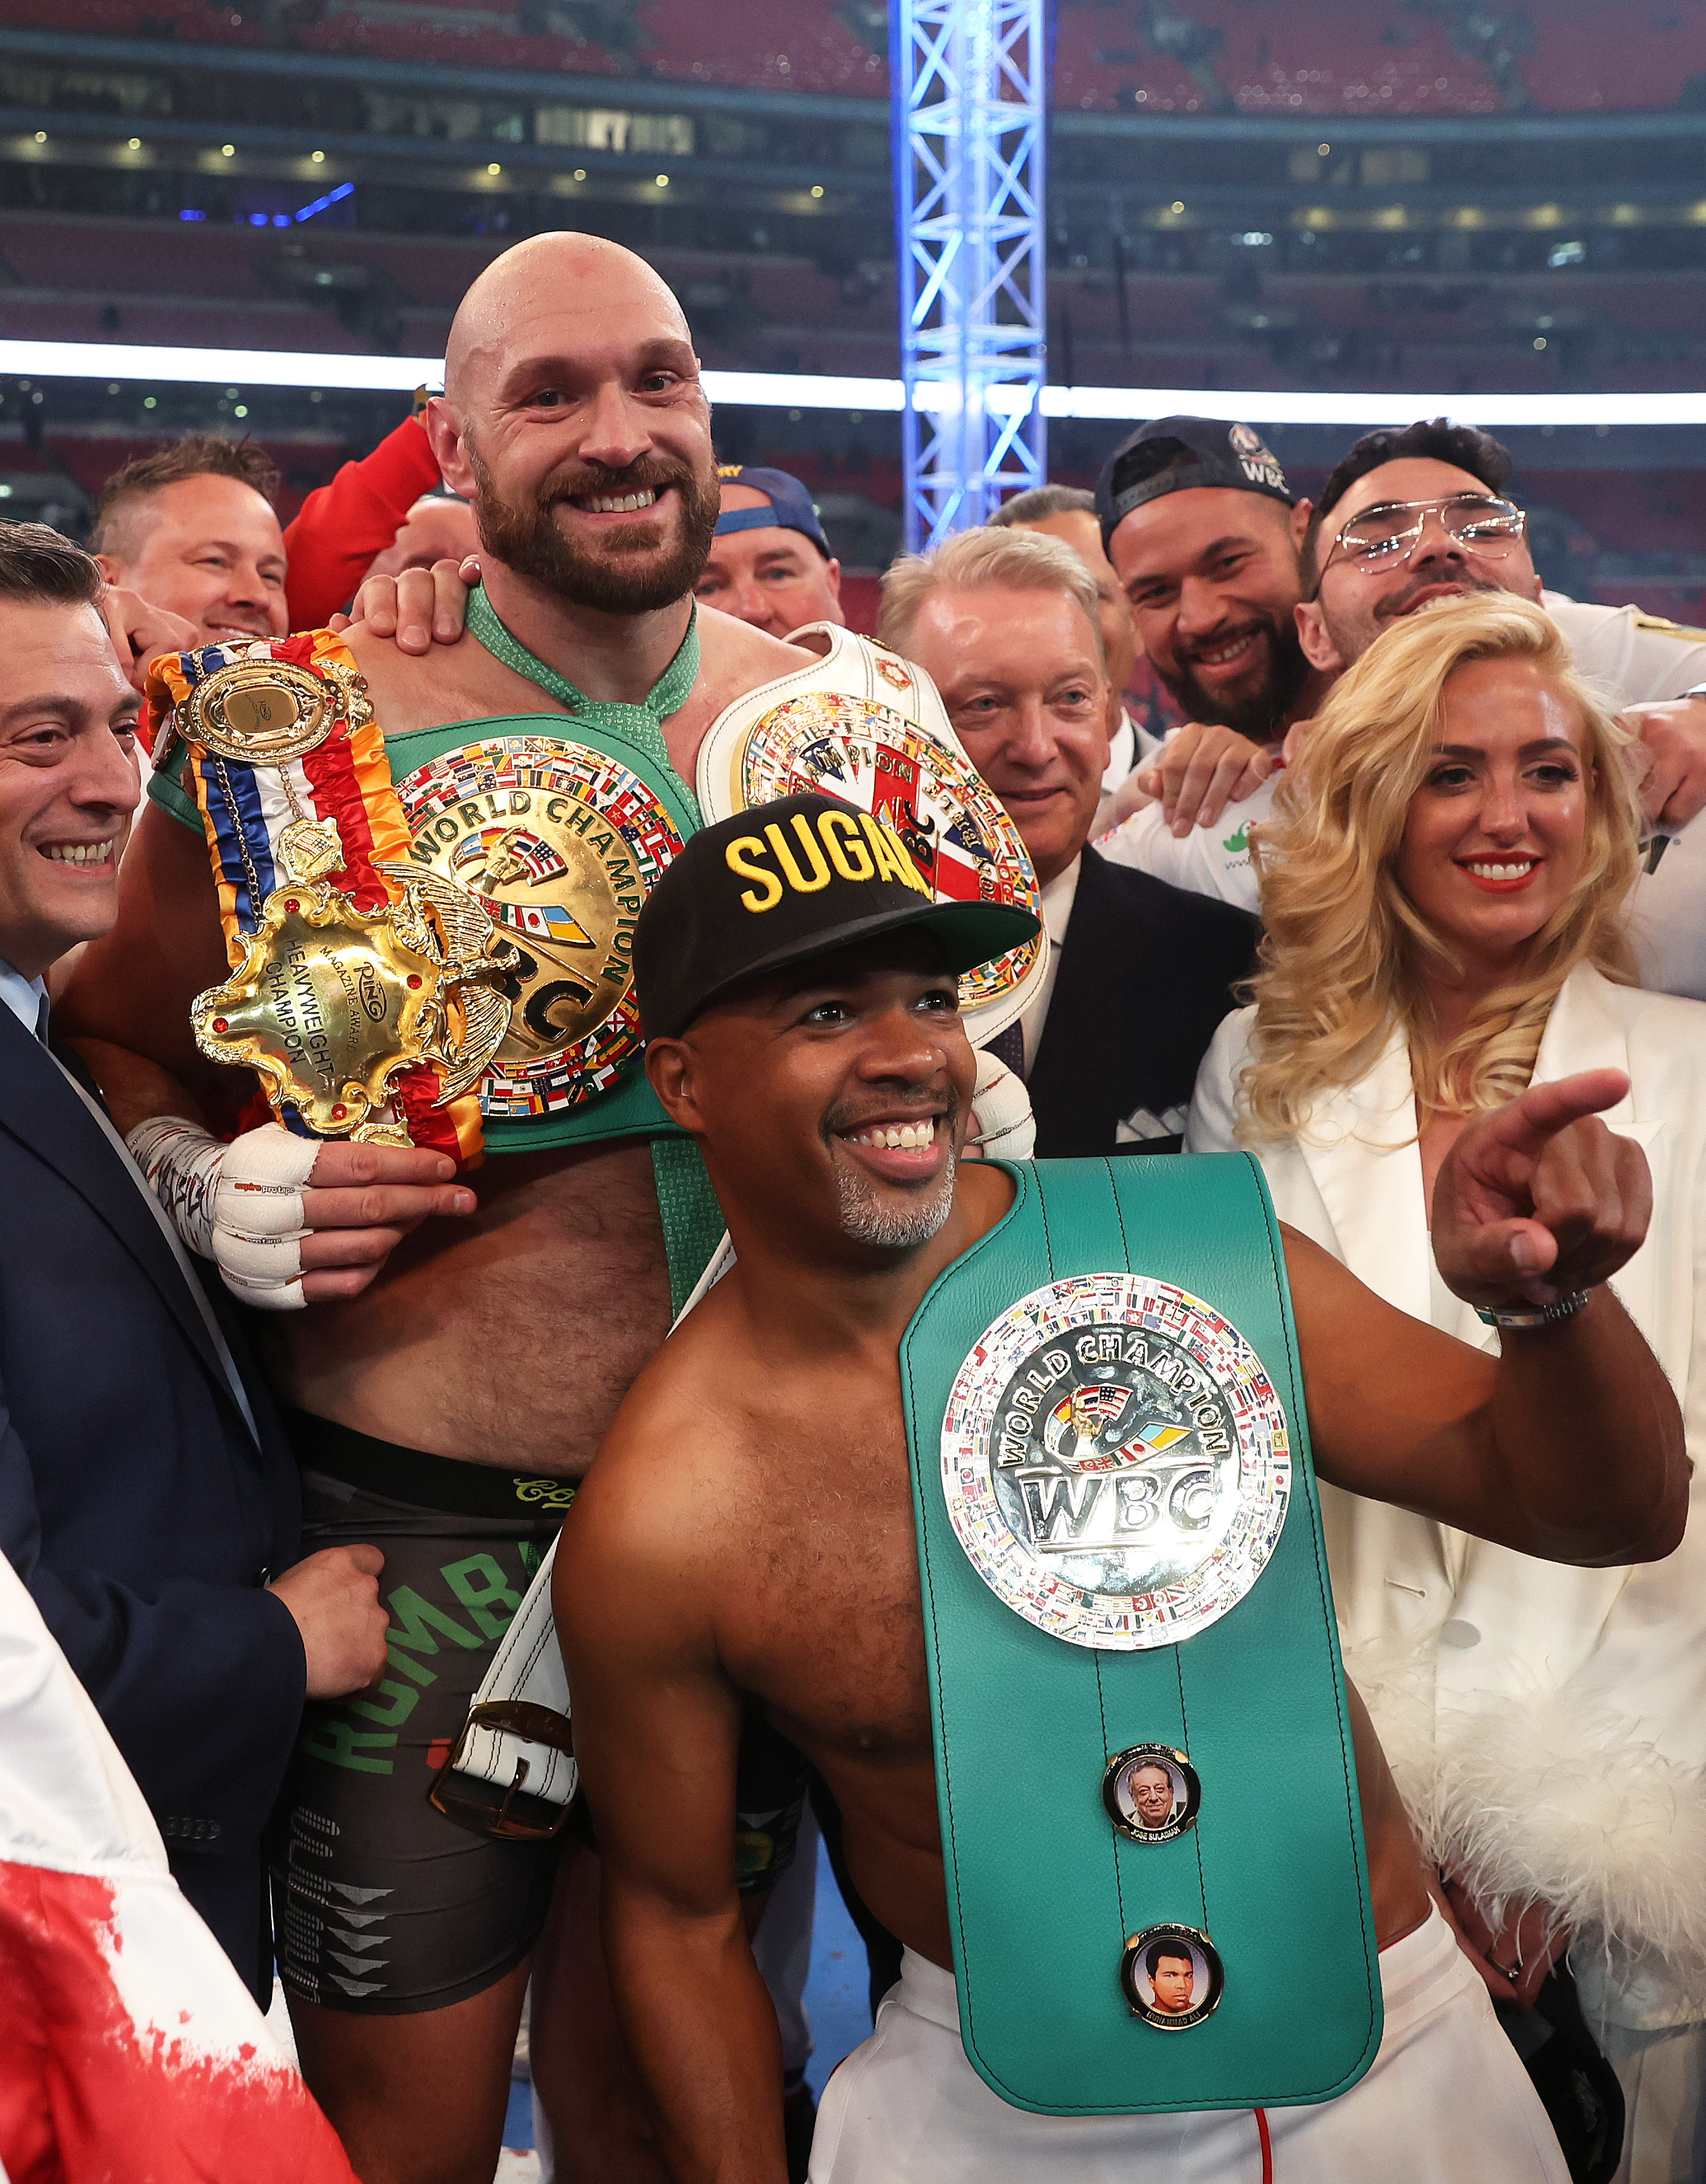 Tyson Fury is out plus more in this week’s boxing rankings update